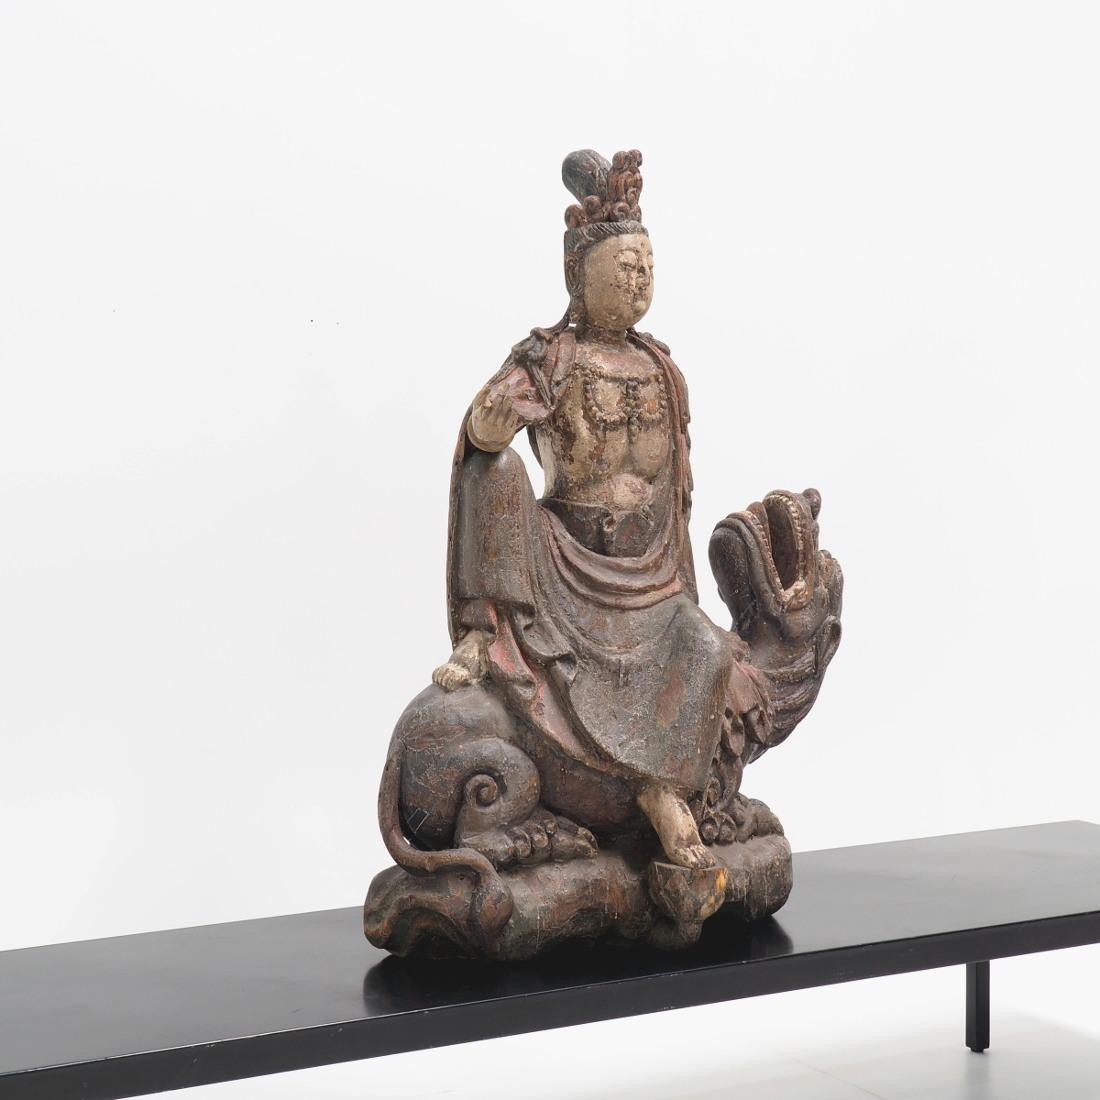 Beautiful wooden statue showing Guanyin, the Chinese interpretation of the bodhisattva. The Guanyin shown here sat on the back of a dragon.

The wood carving is from the 17th Century with its original polychrome. It's quit big with a beautiful